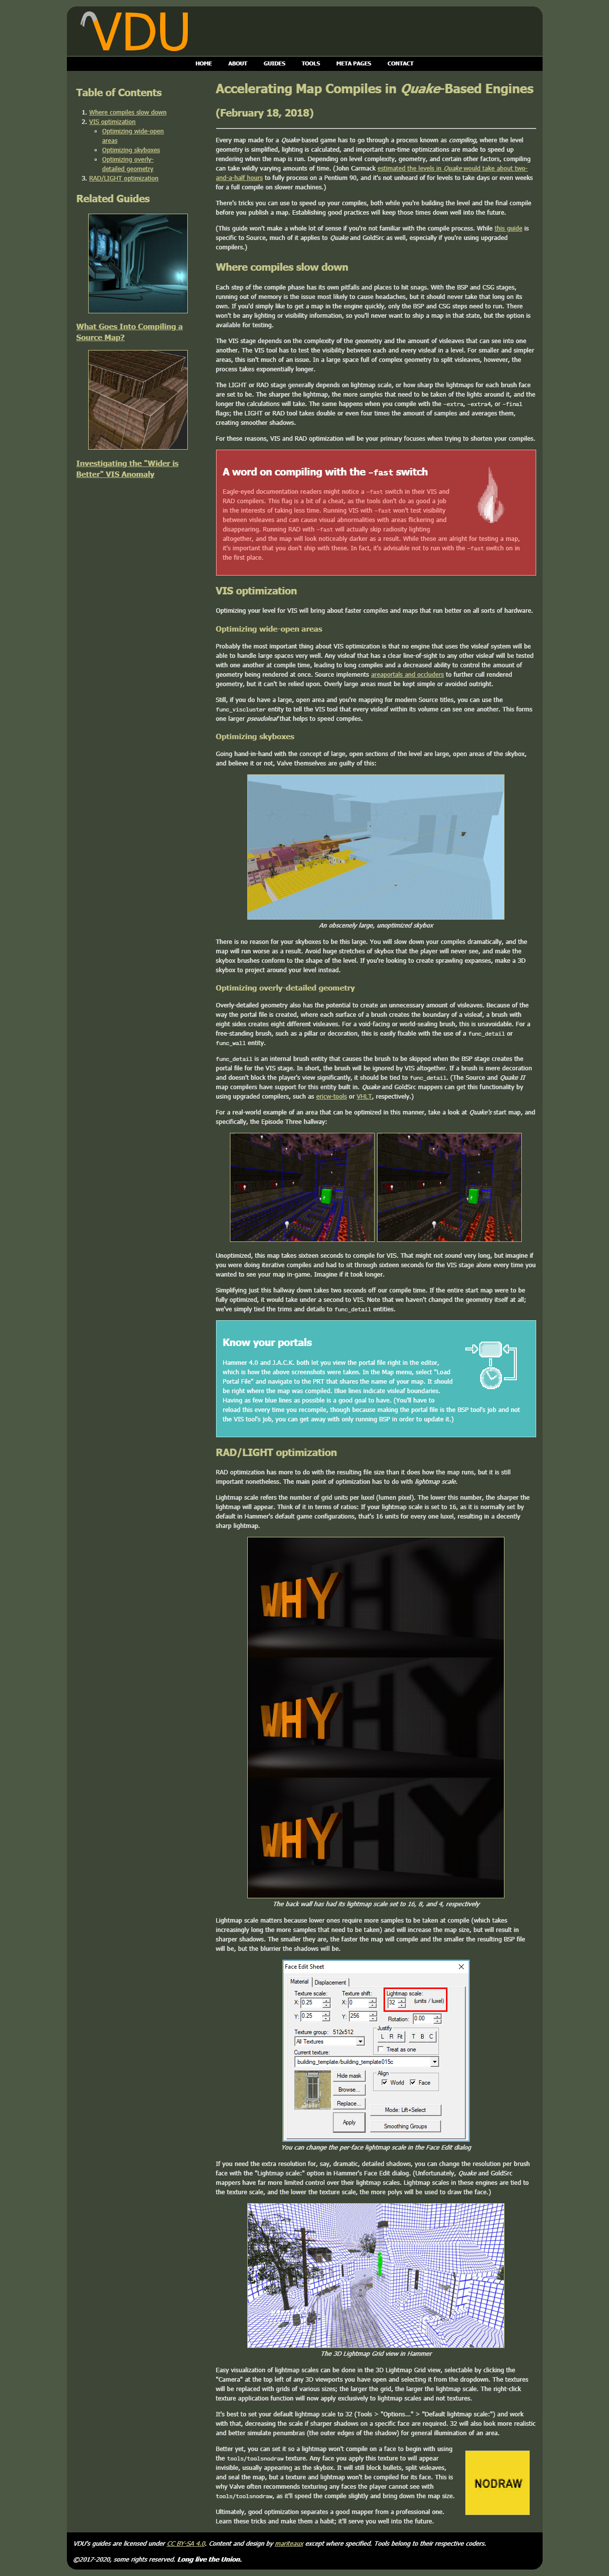 A full-page capture of nuVDU as a work-in-progress